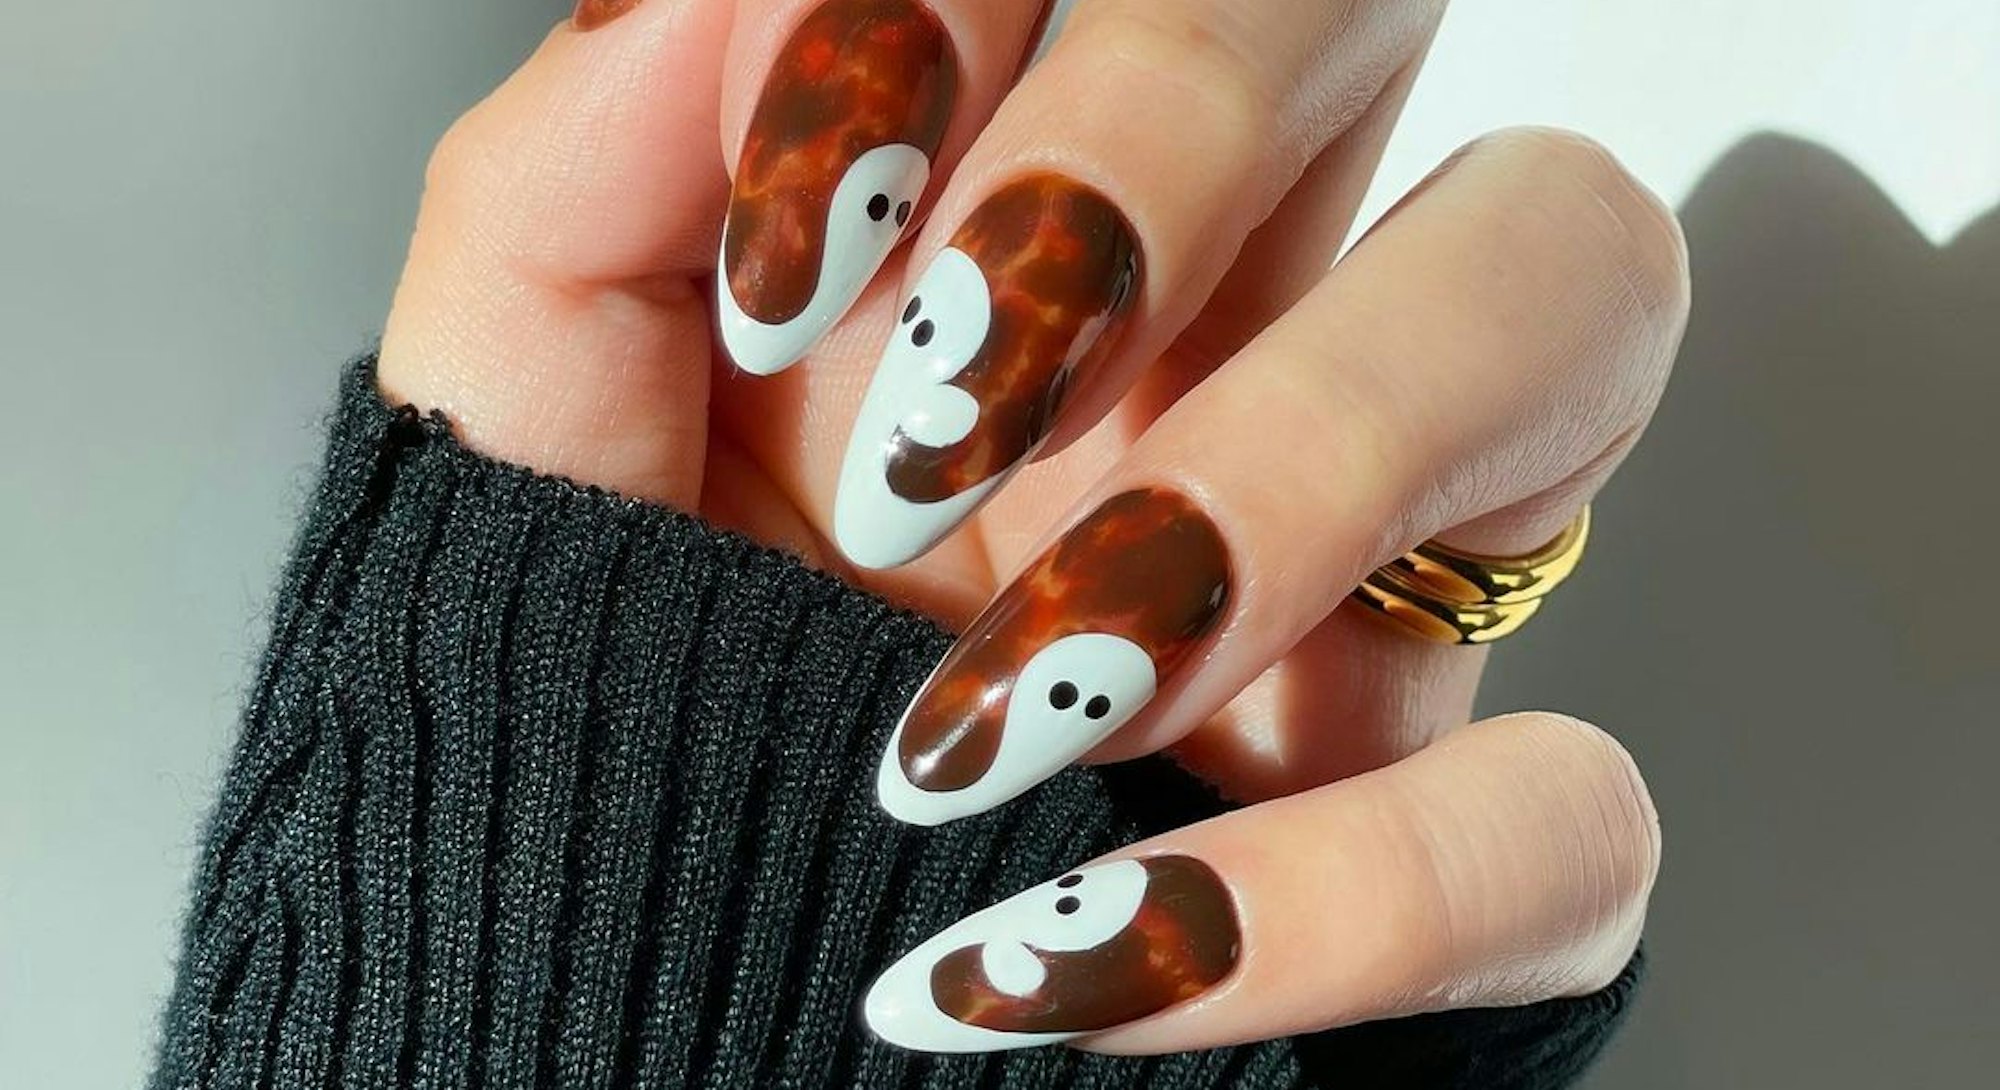 White ghosts with a tortoiseshell print are the classy way to do Halloween nails. Here are more cute...